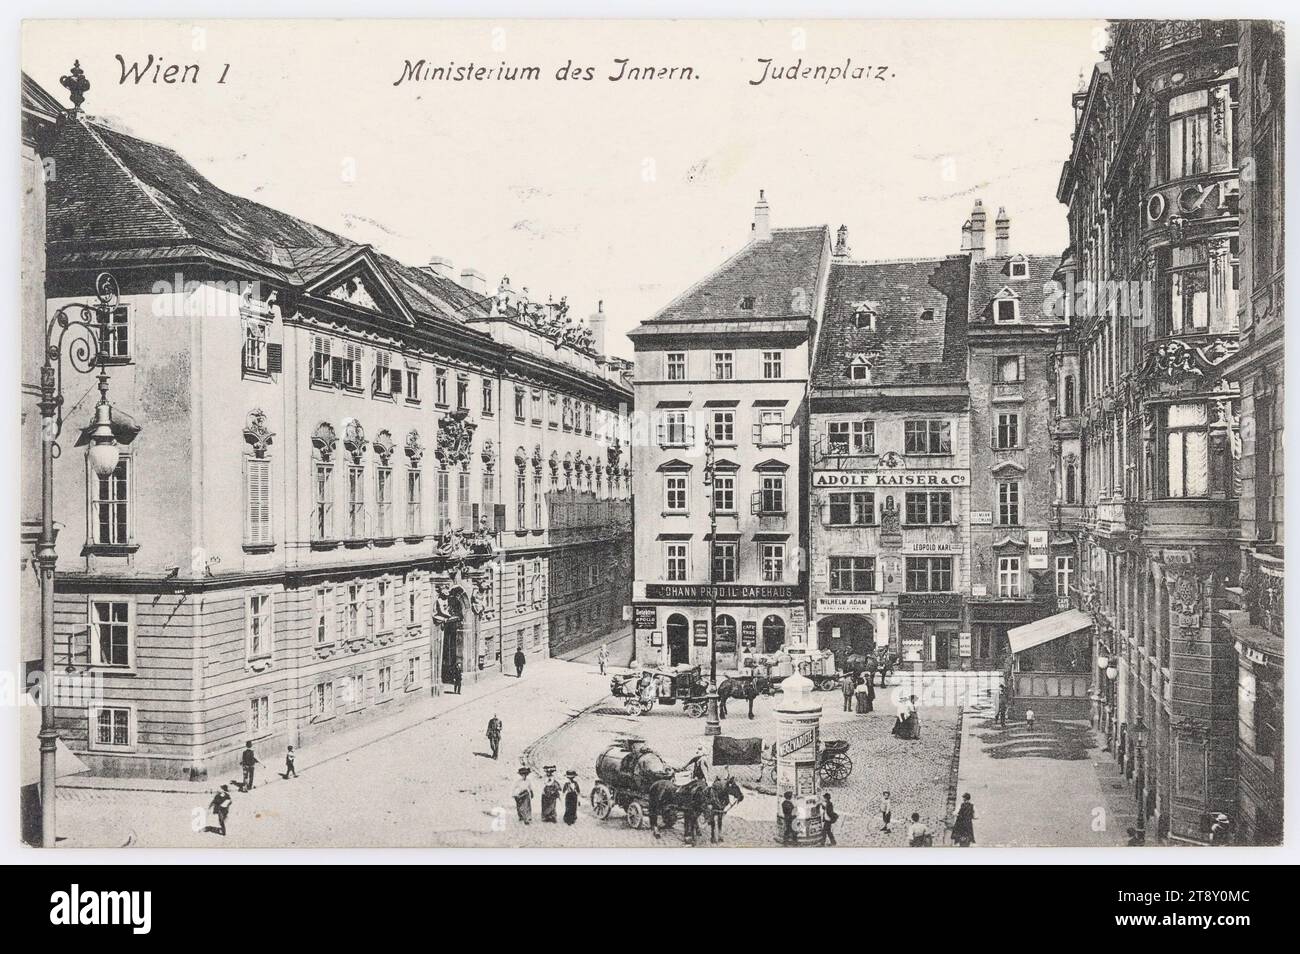 Vienna I. Ministry of the Interior. Judenplatz, Paul Ledermann (1882-1946), Producer, 1910, paperboard, Collotype, Inscription, FROM, Vienna, TO, Vienna, ADDRESS, [Hochwolgeboren], Frau, Wien III, Marokkanergasse 23, MESSAGE, My warmest congratulations on your name day. Greetings from me very much Erich and Werner u Bernhard. Hopefully you will have nice weather tomorrow. Repeating all the best, your devoted cousin, Emma, remains with heartfelt greetings. Cousin Emma, Politics, Offices and Administration, Media and Communication, Postcards with transliteration Stock Photo